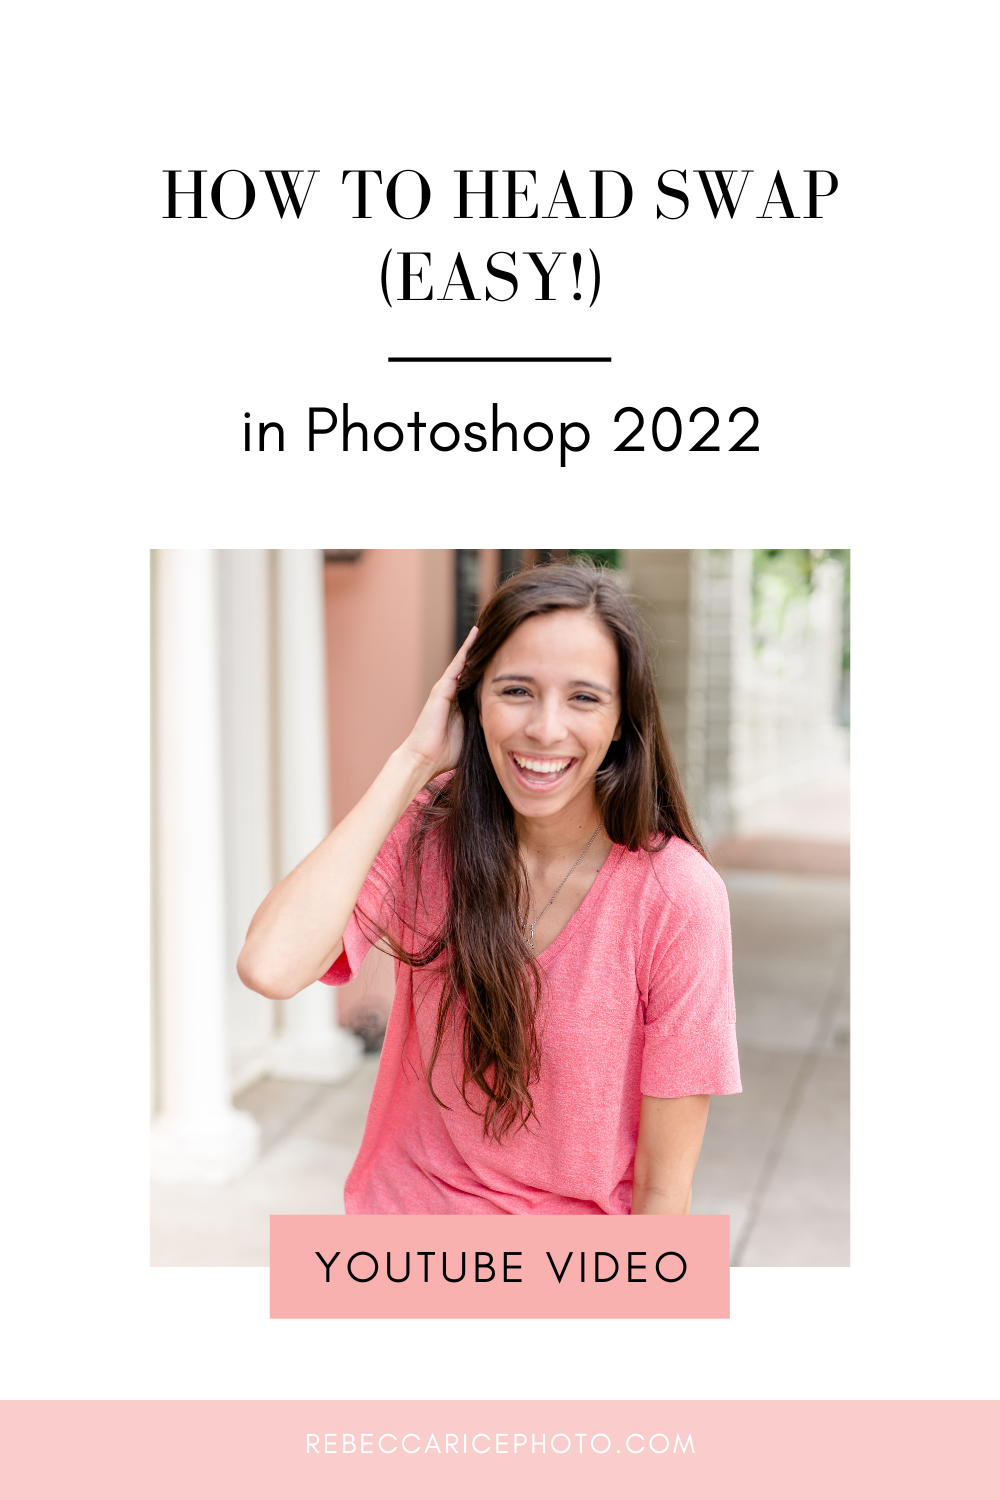 How to head swap (easy!) in photoshop 2022